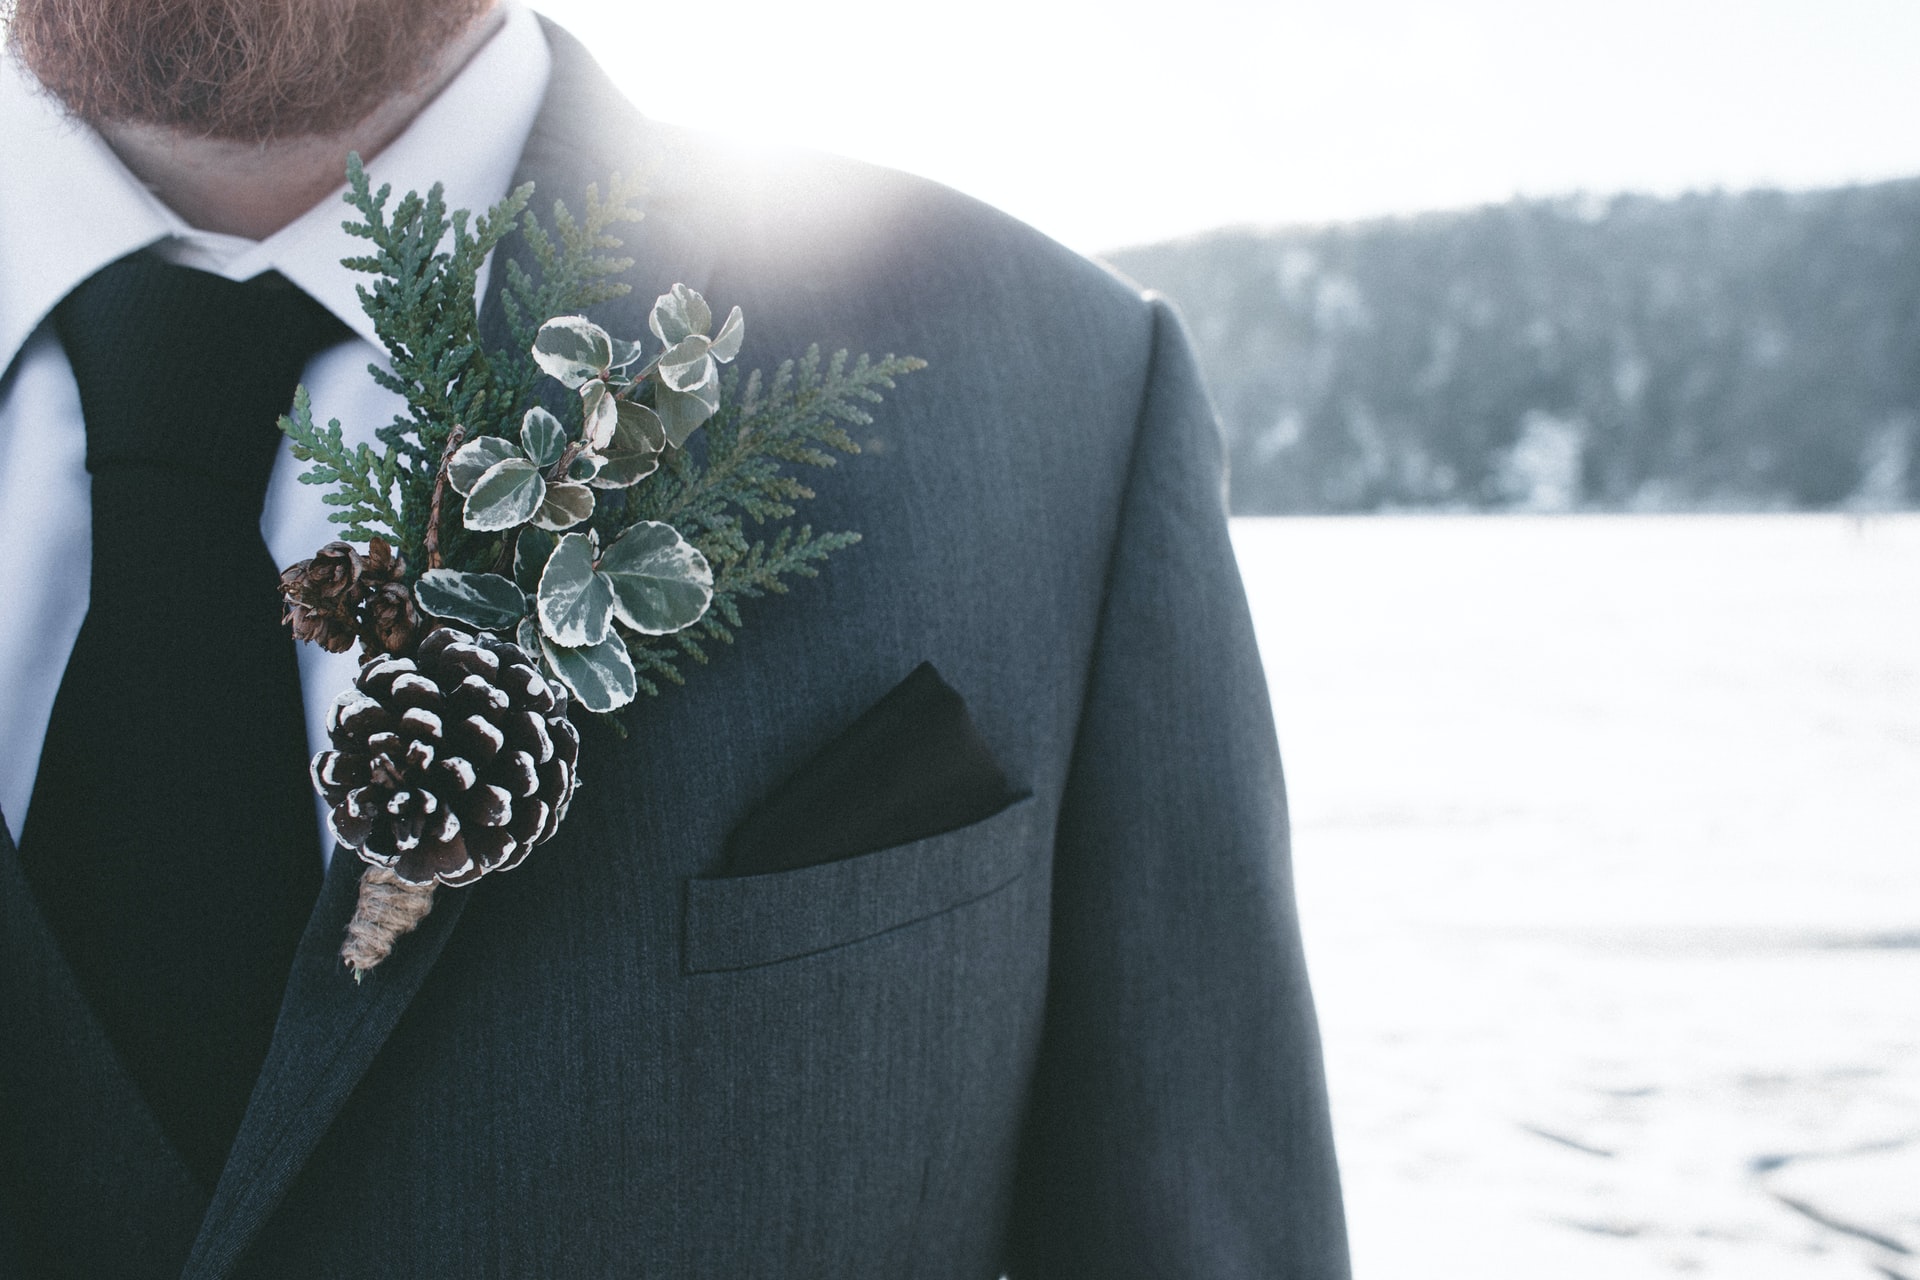 Winter wedding accessories – we suggest which ones to bet on